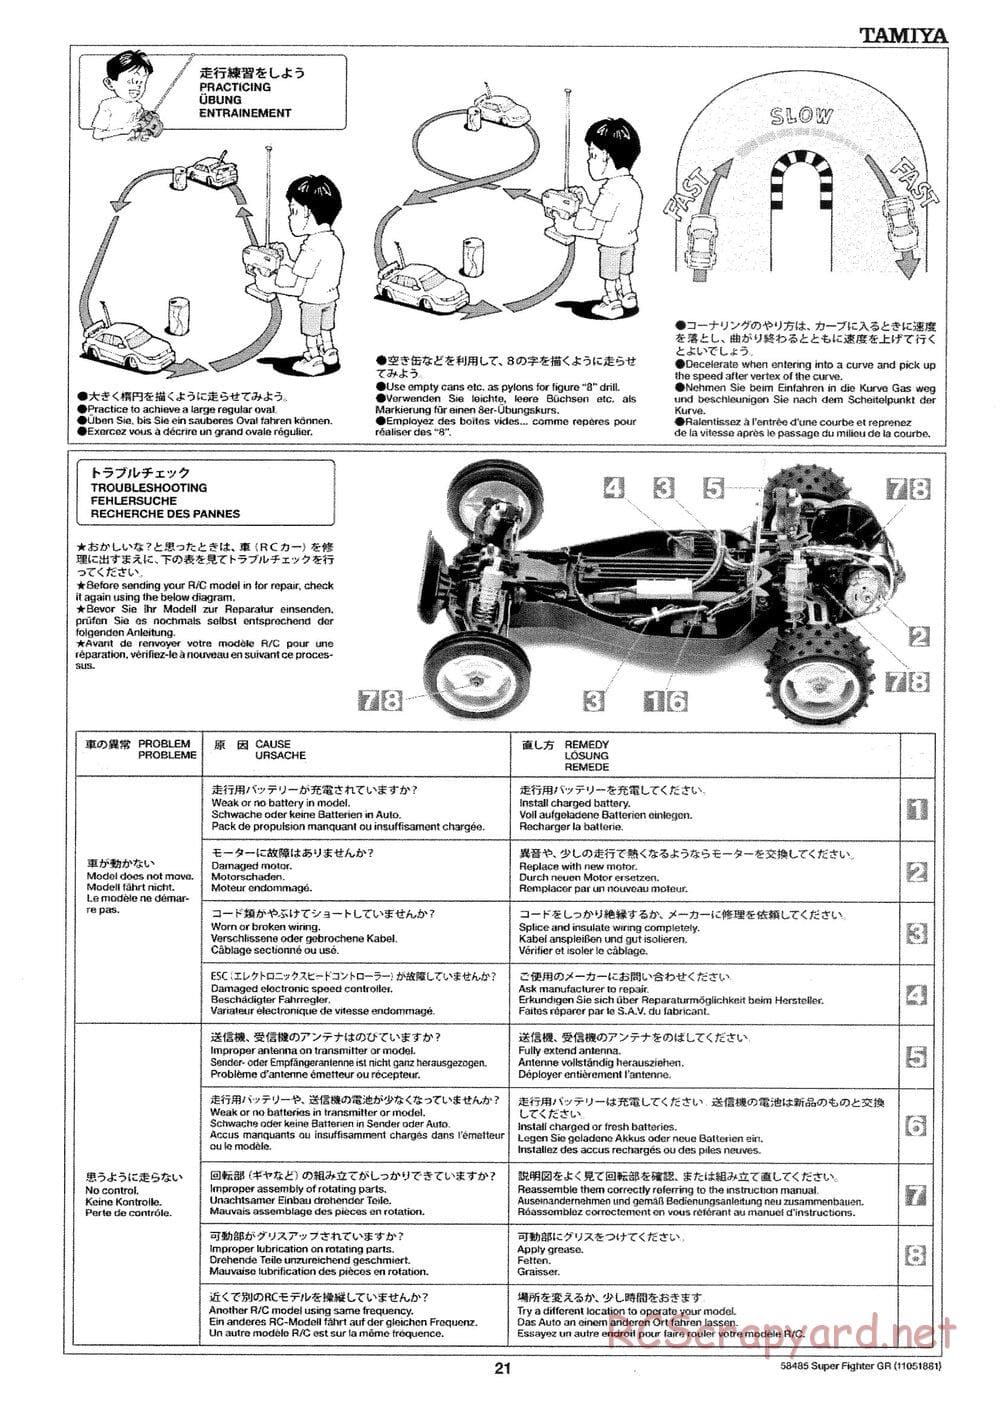 Tamiya - Super Fighter GR - DT-02 Chassis - Manual - Page 21